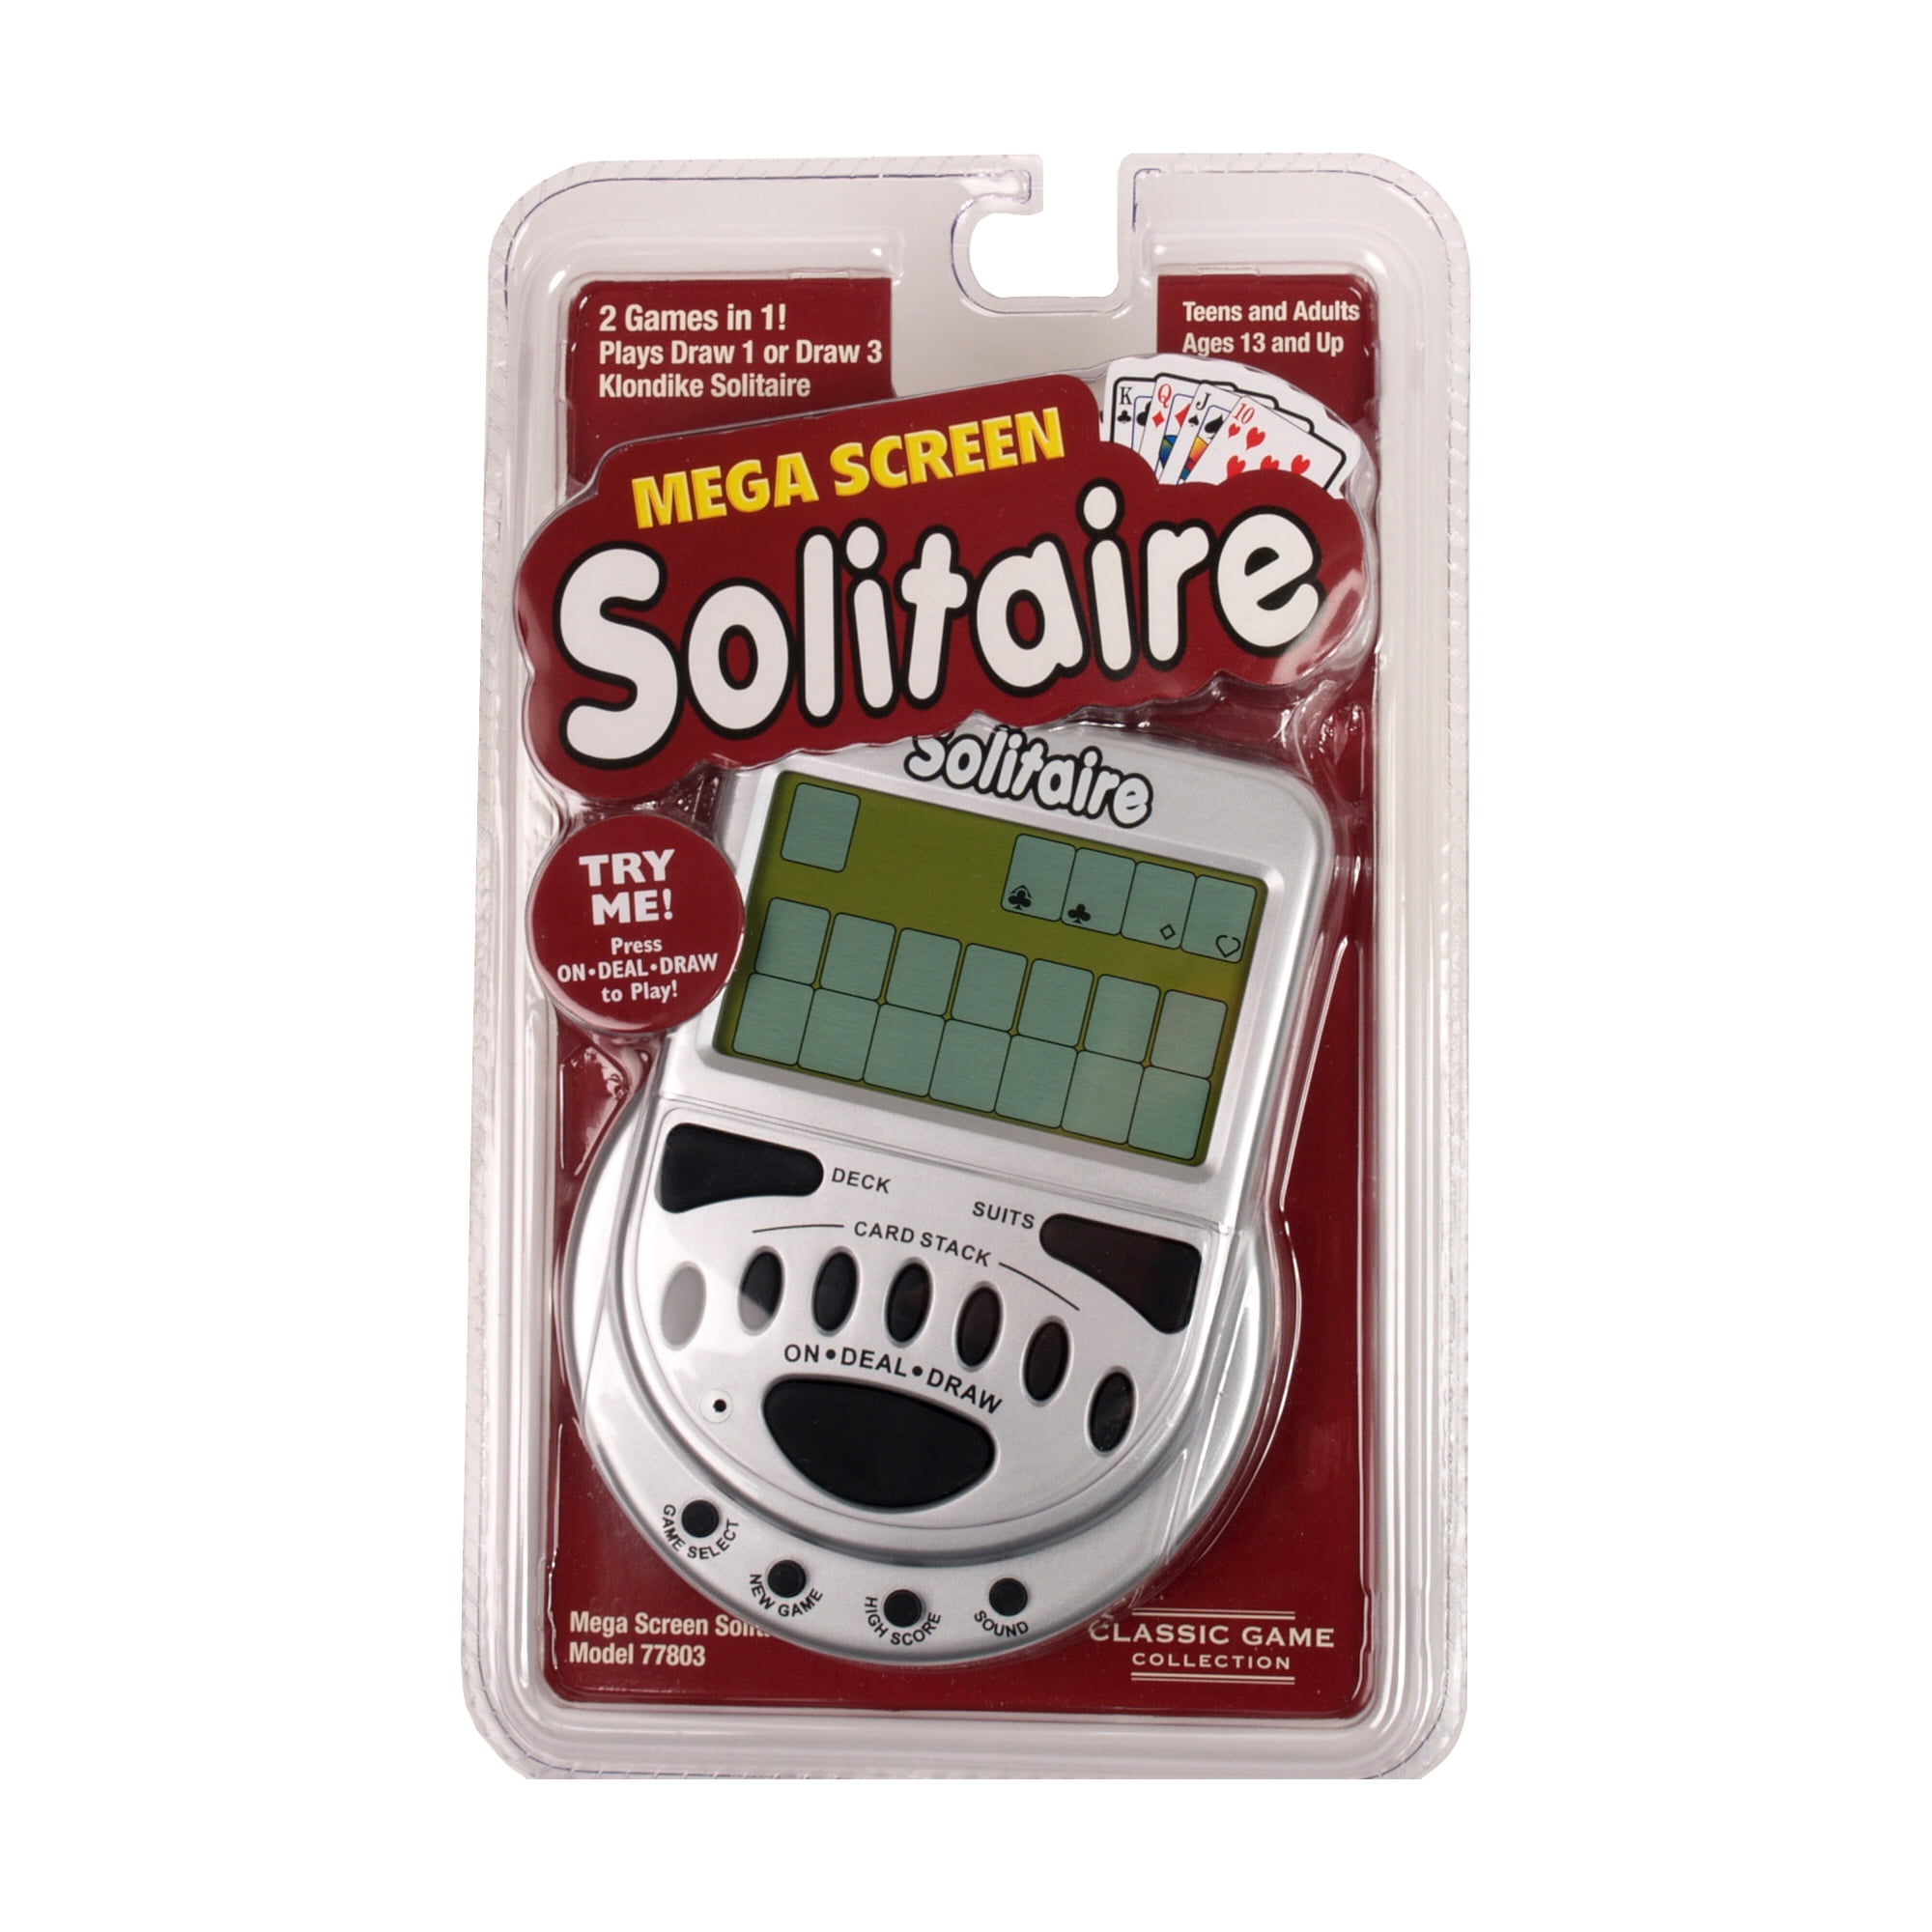 RADICA FLIP TOP SOLITAIRE LIGHT ELECTRONIC HANDHELD TOY VIDEO GAME TRAVEL CARDS 